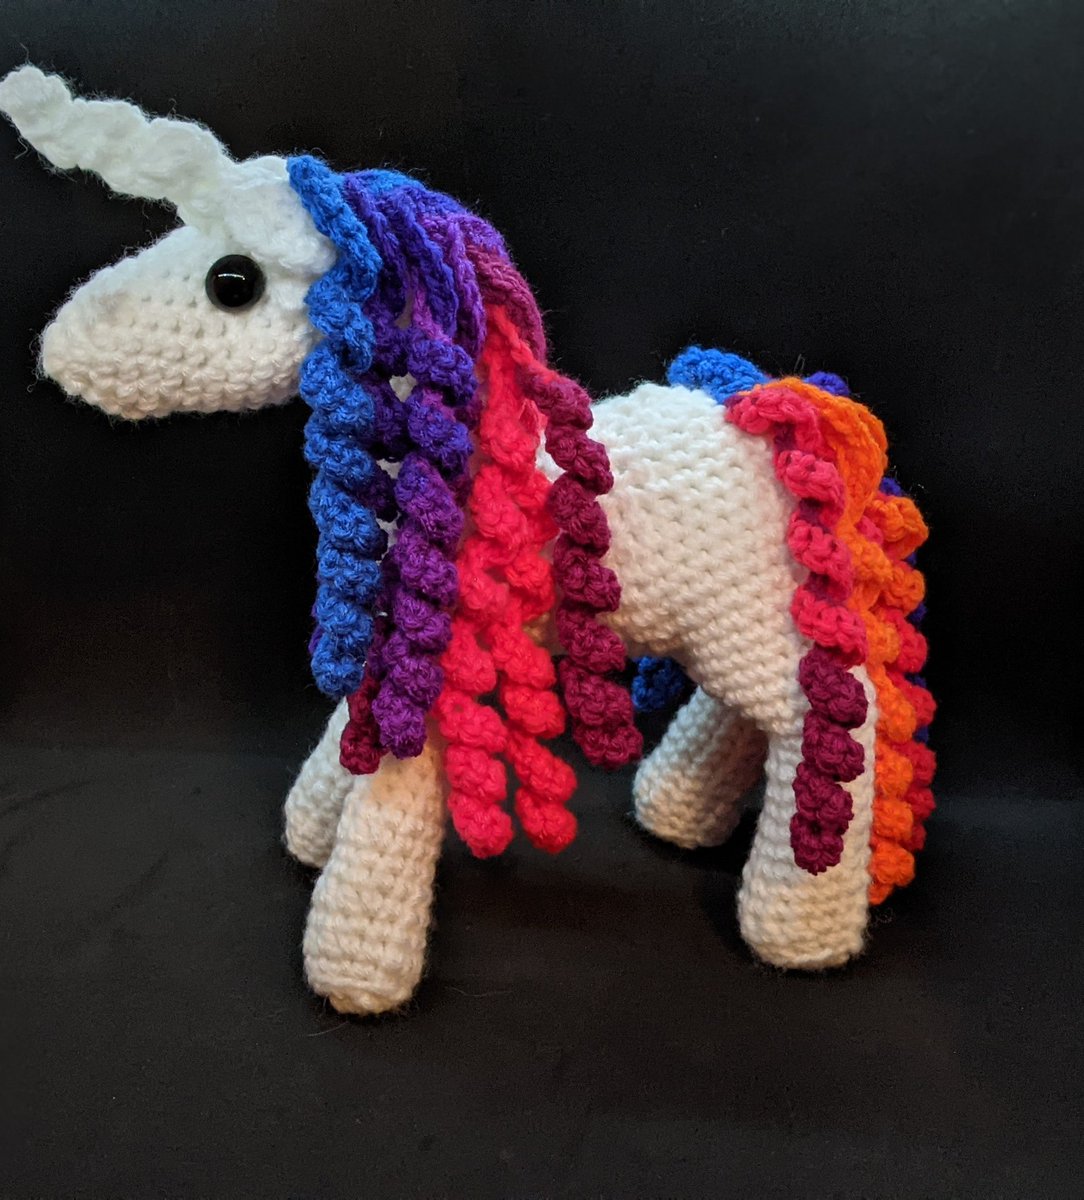 Finally got to play around a bit more with my new light box, and I also just finished up this unicorn! 😍🦄 
#unicorncrochet #unicorn #amigurumi #amigurumiunicorn #crochetunicorn #crochet #EtsySeller